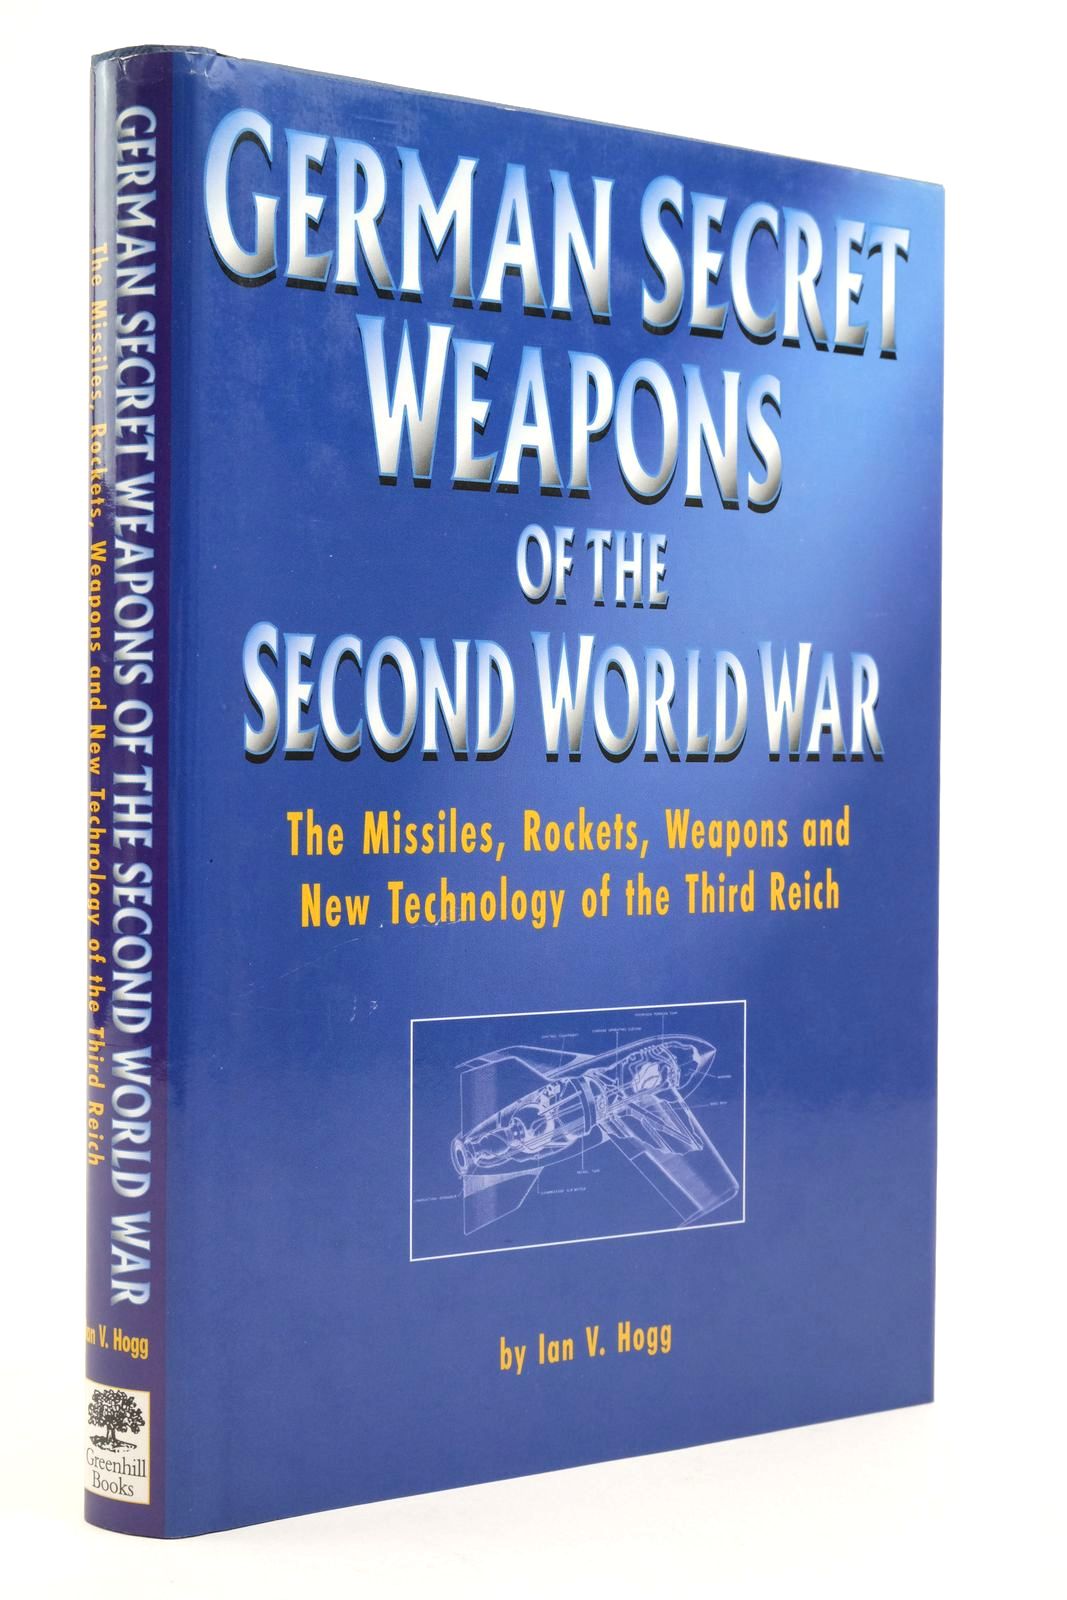 Photo of GERMAN SECRET WEAPONS OF THE SECOND WORLD WAR written by Hogg, Ian V. published by Greenhill Books (STOCK CODE: 2138827)  for sale by Stella & Rose's Books